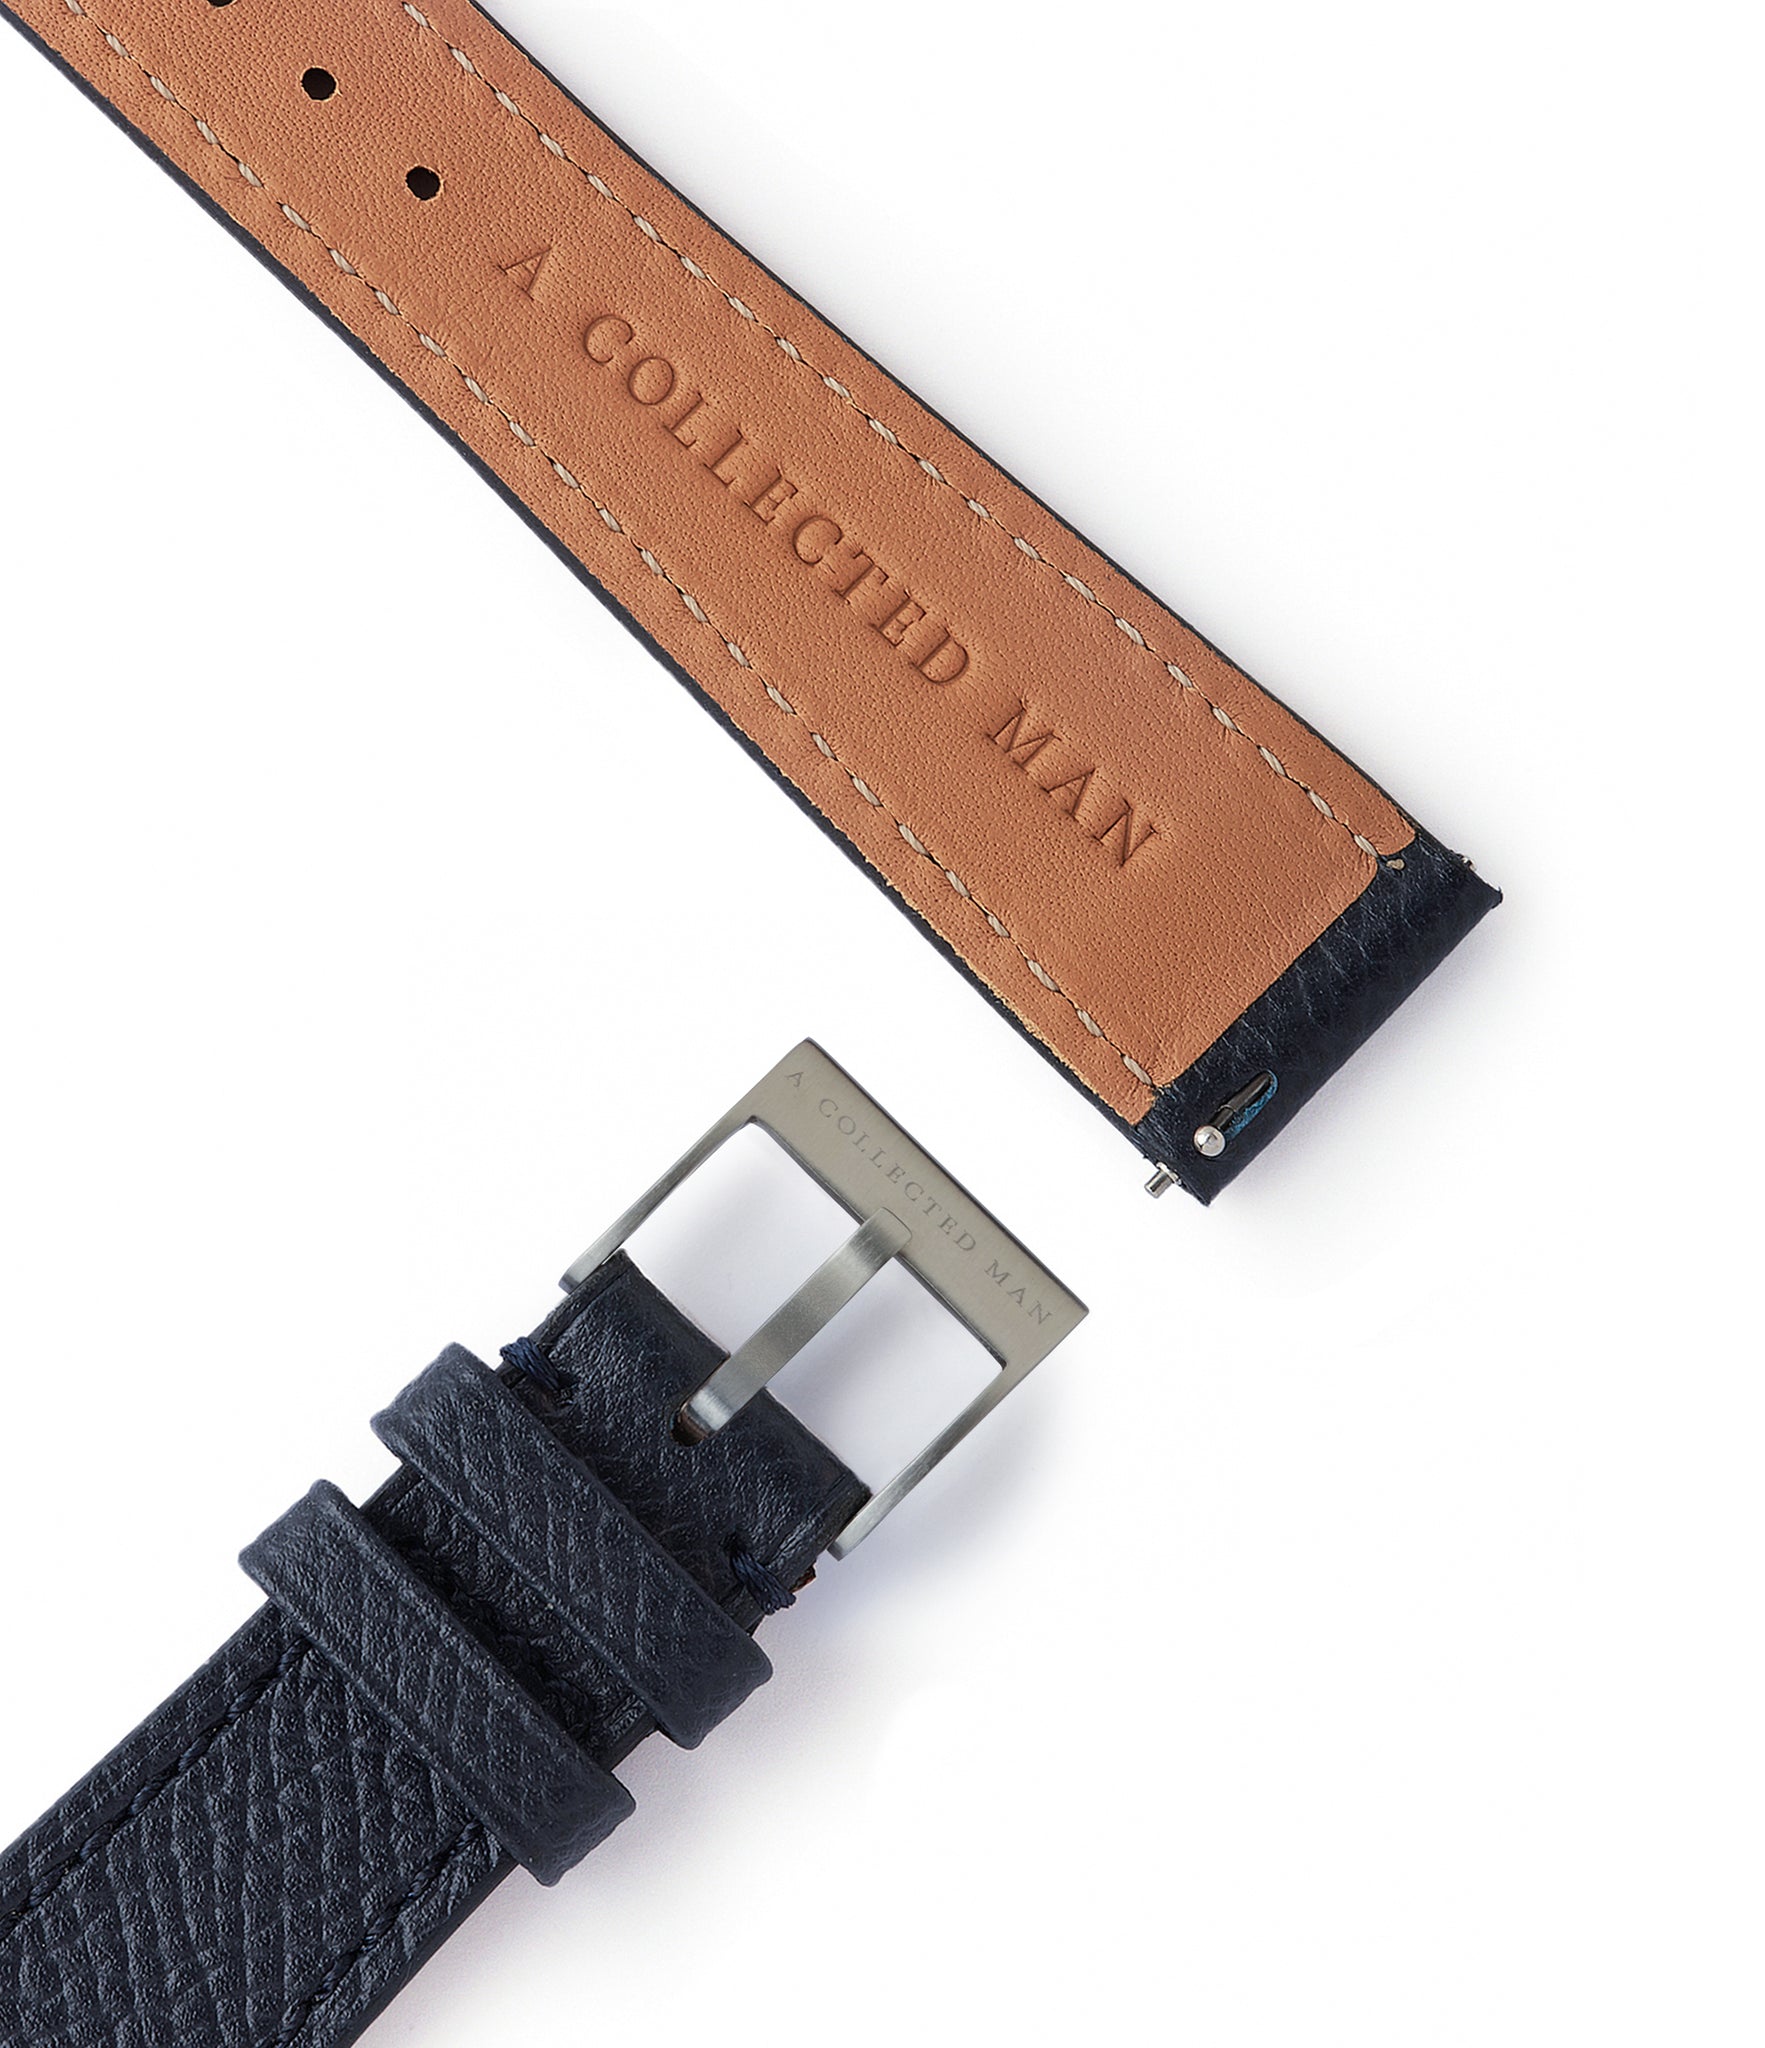 Shop La Rochelle Molequin watch strap grained navy blue calfskin leather quick-release springbars buckle handcrafted European-made for sale online at A Collected Man London